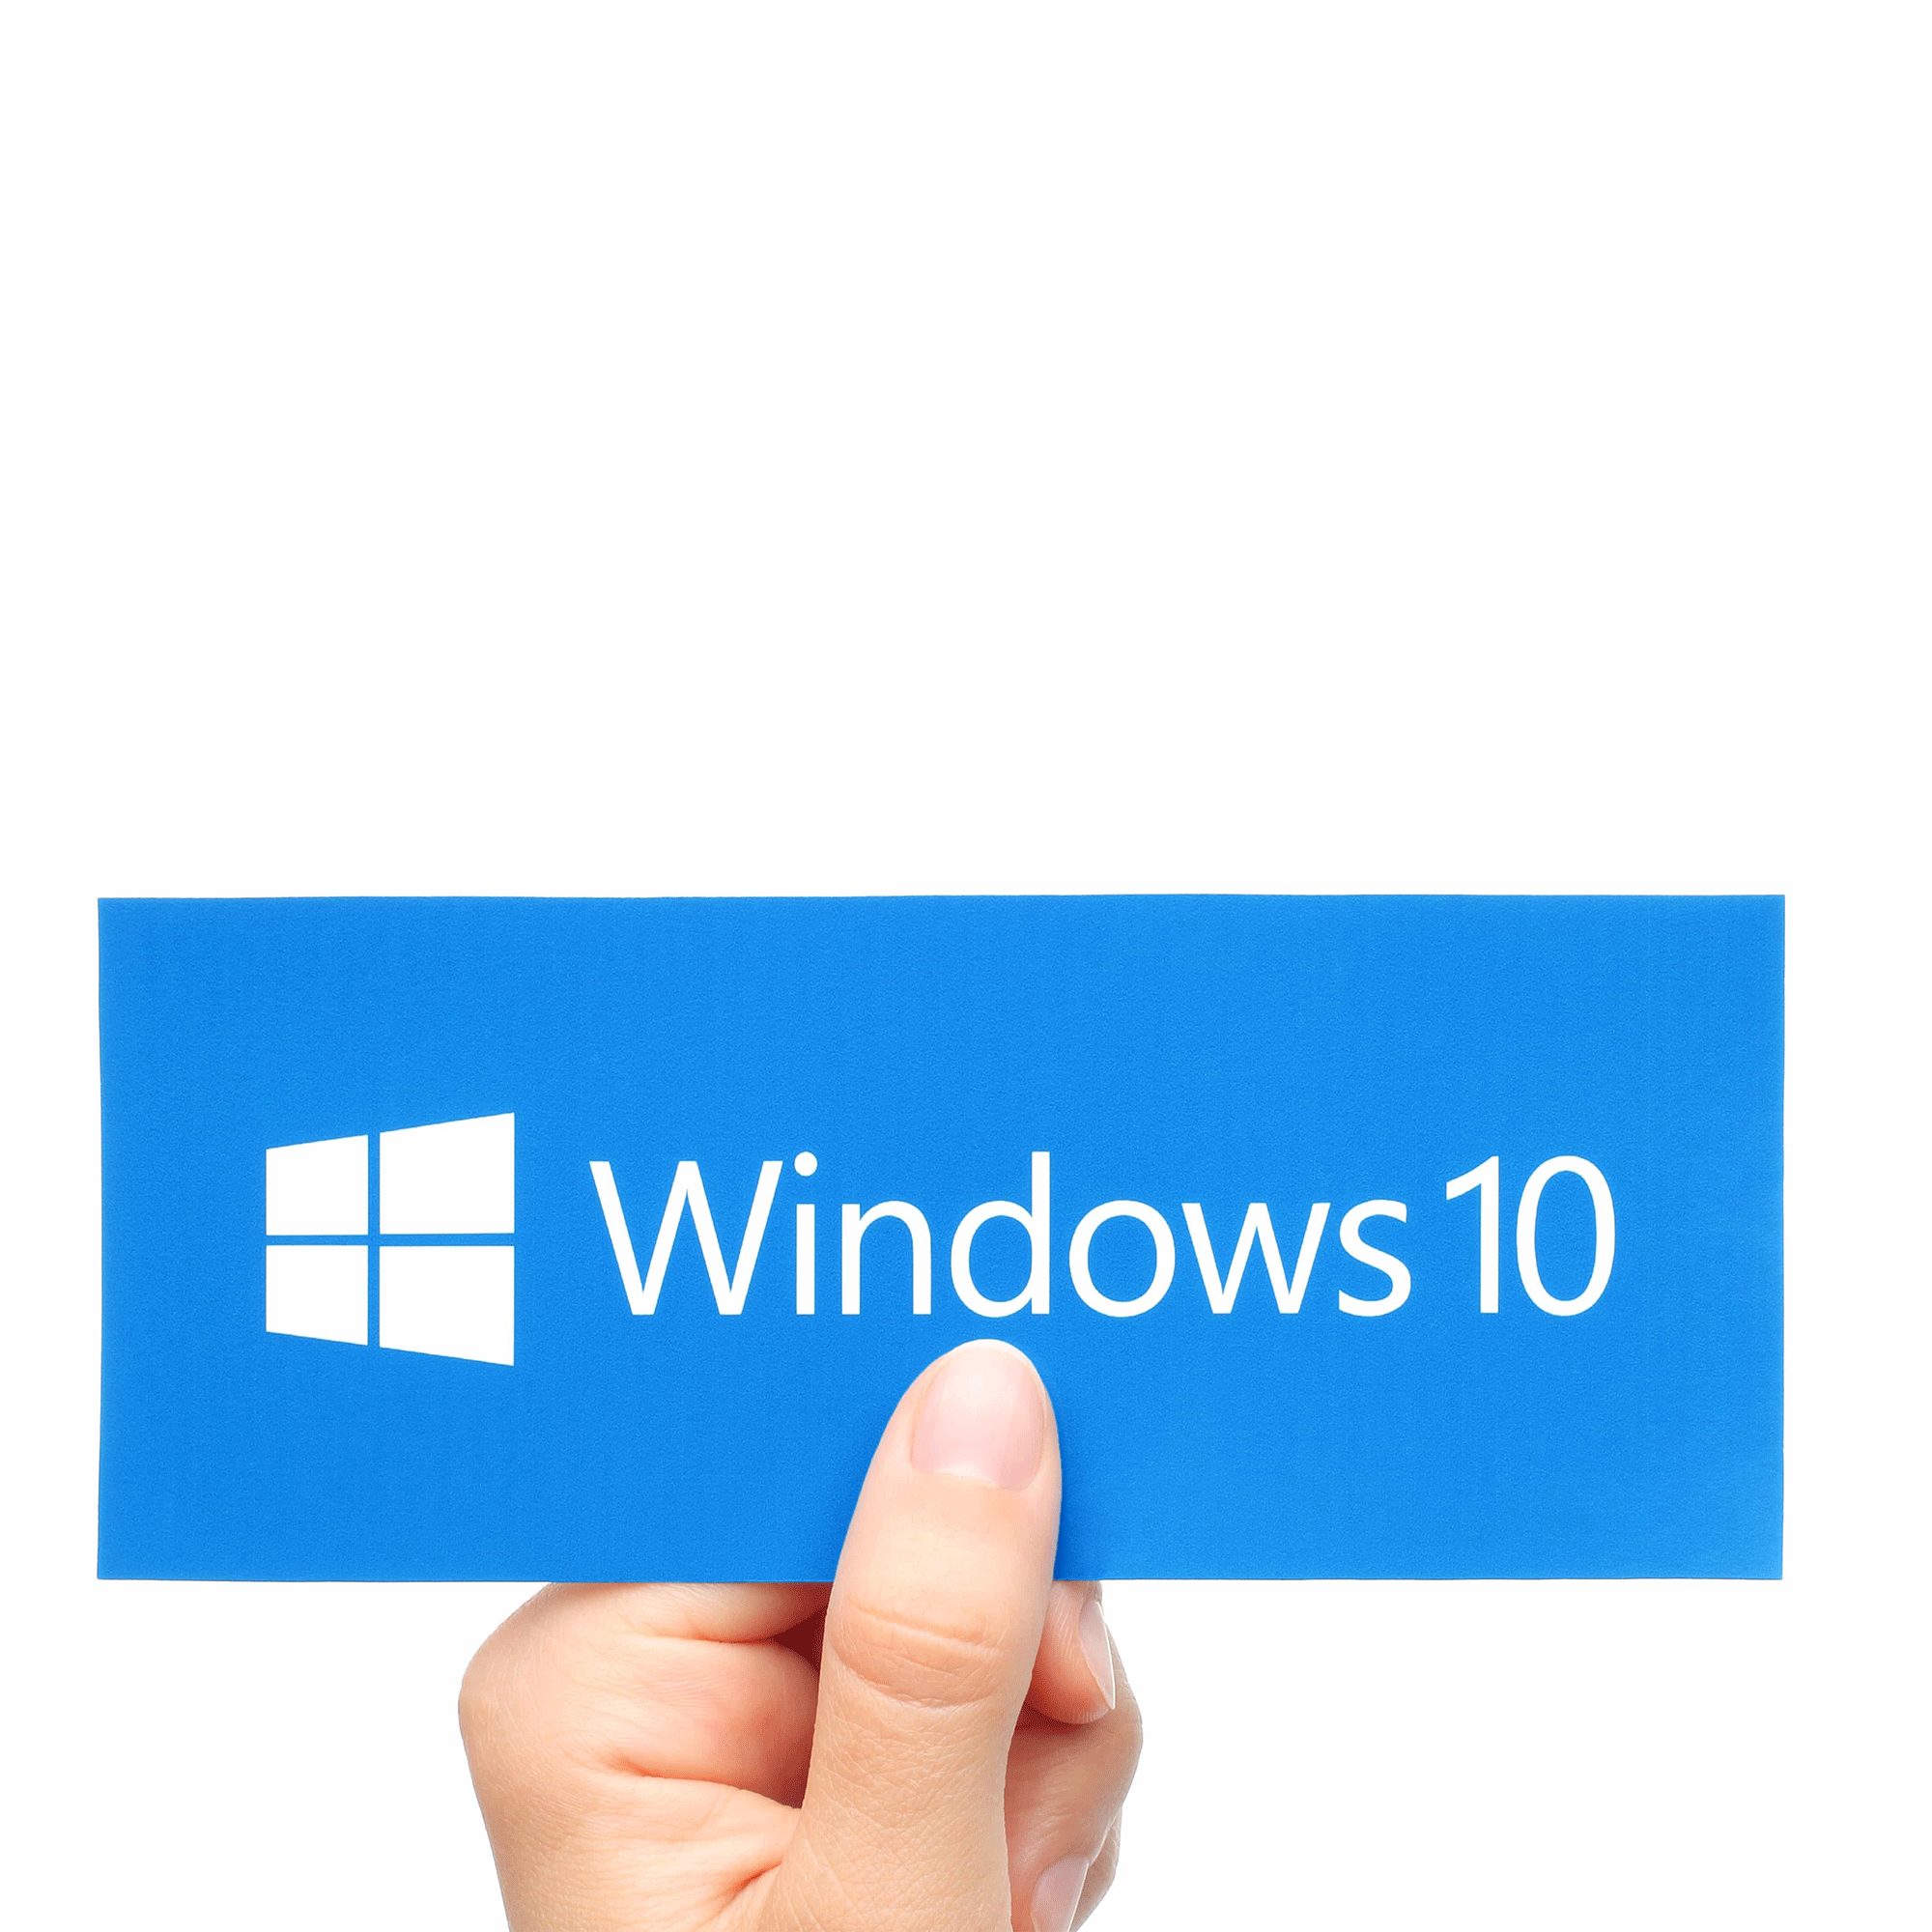 Fall in Love with Windows 10